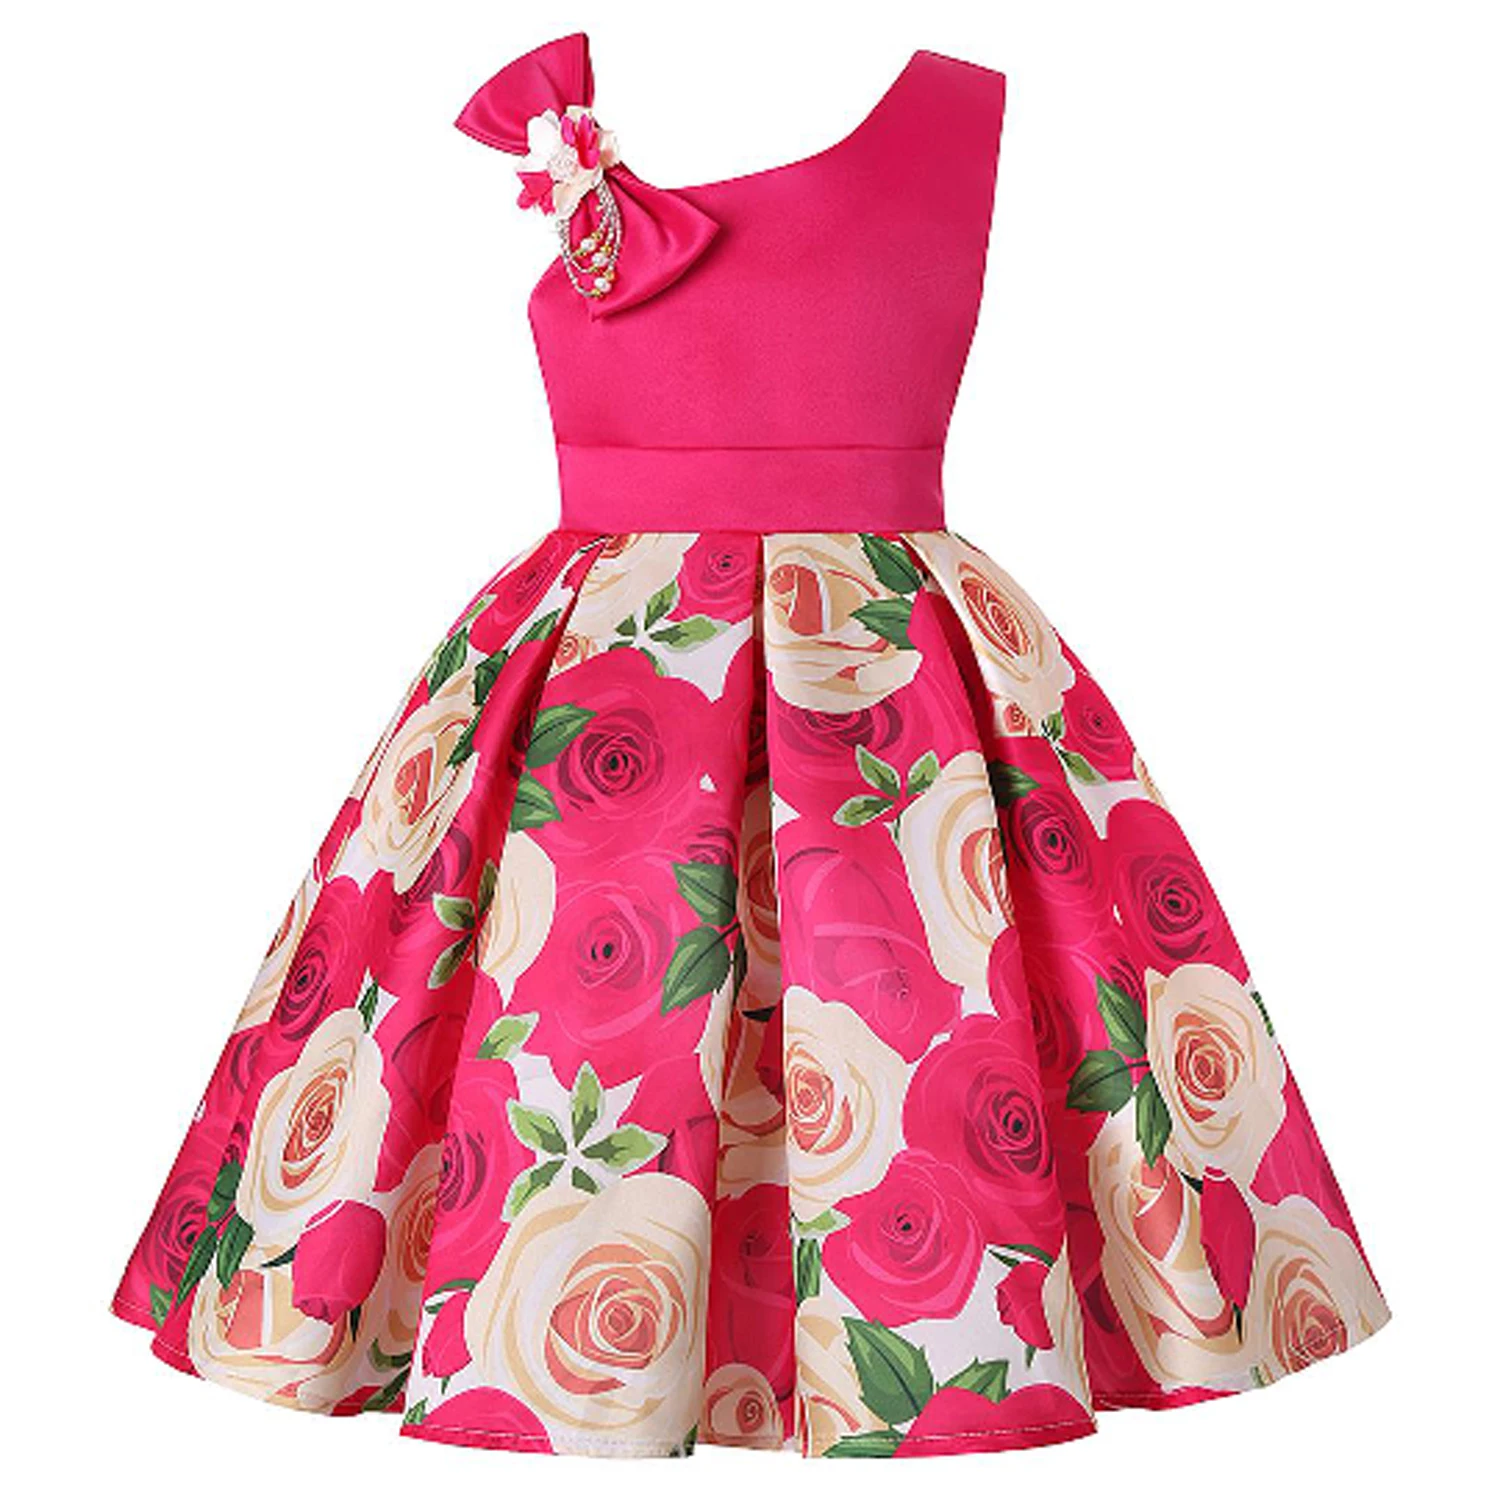 

new pattern Oblique shoulder Rose Print boby girl dresses party Bow without sleeve evening party Children's Birthday Dress